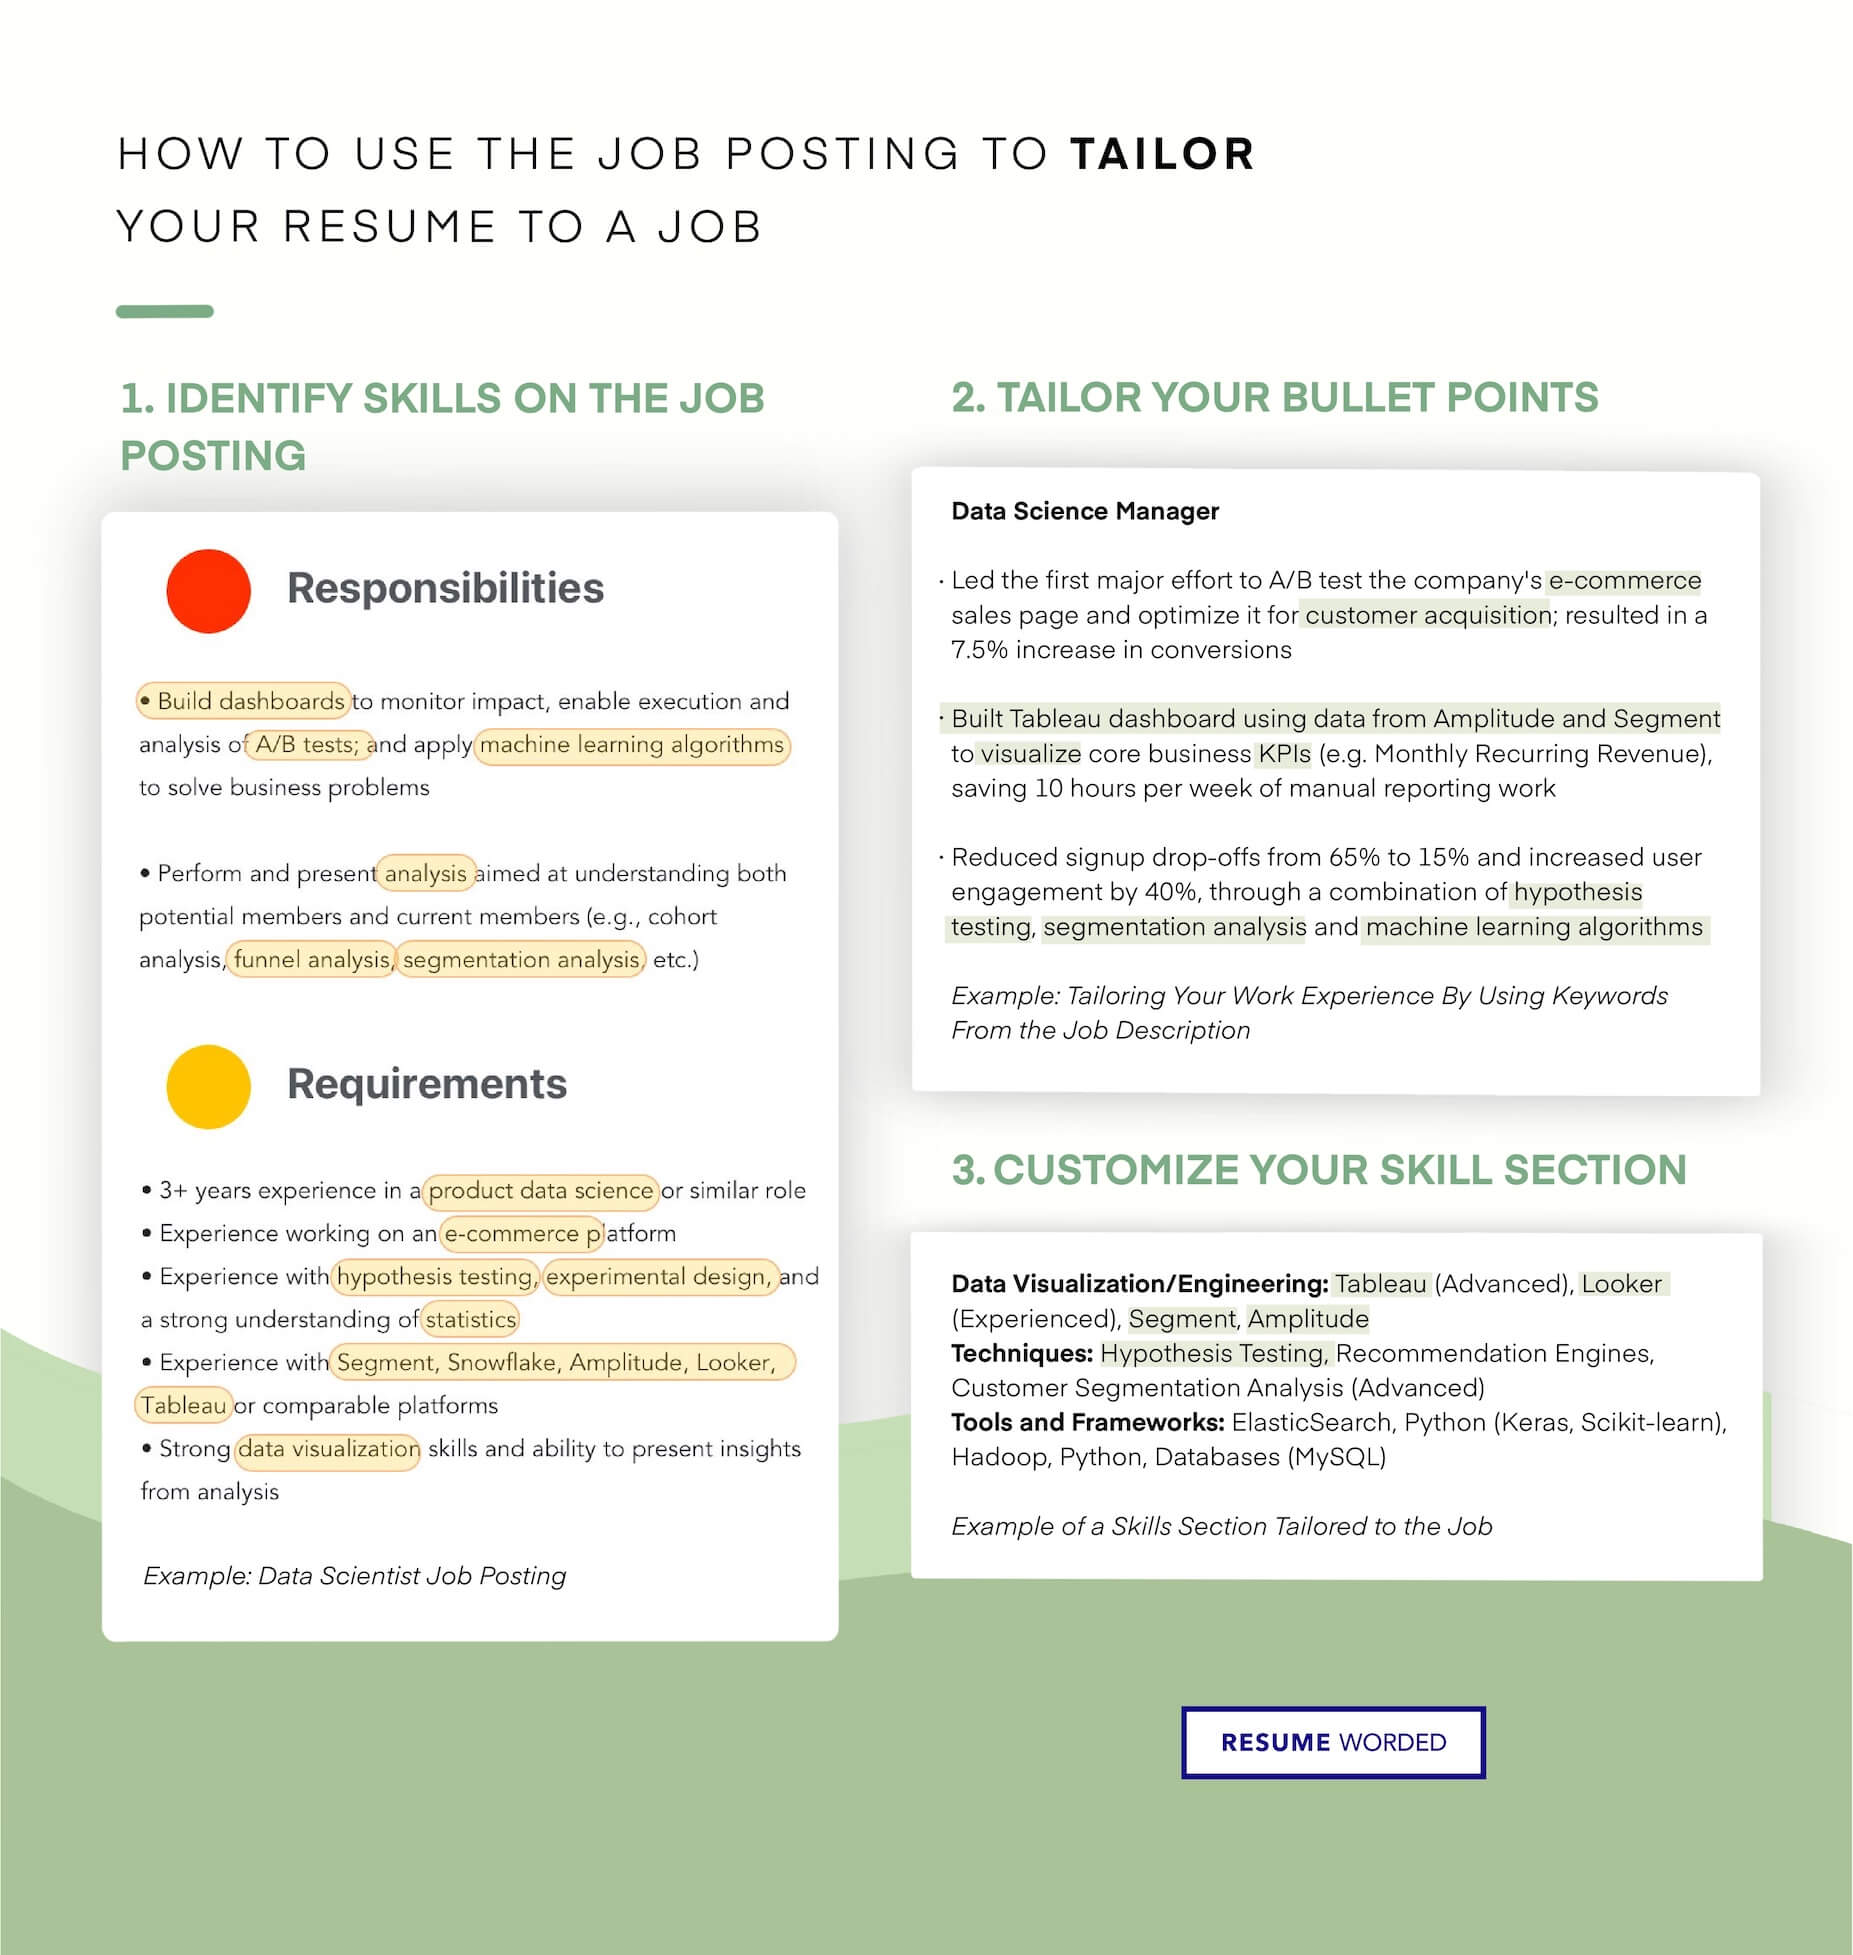 Tailor your resume to the fashion merchandising industry. - Fashion Merchandising  Resume